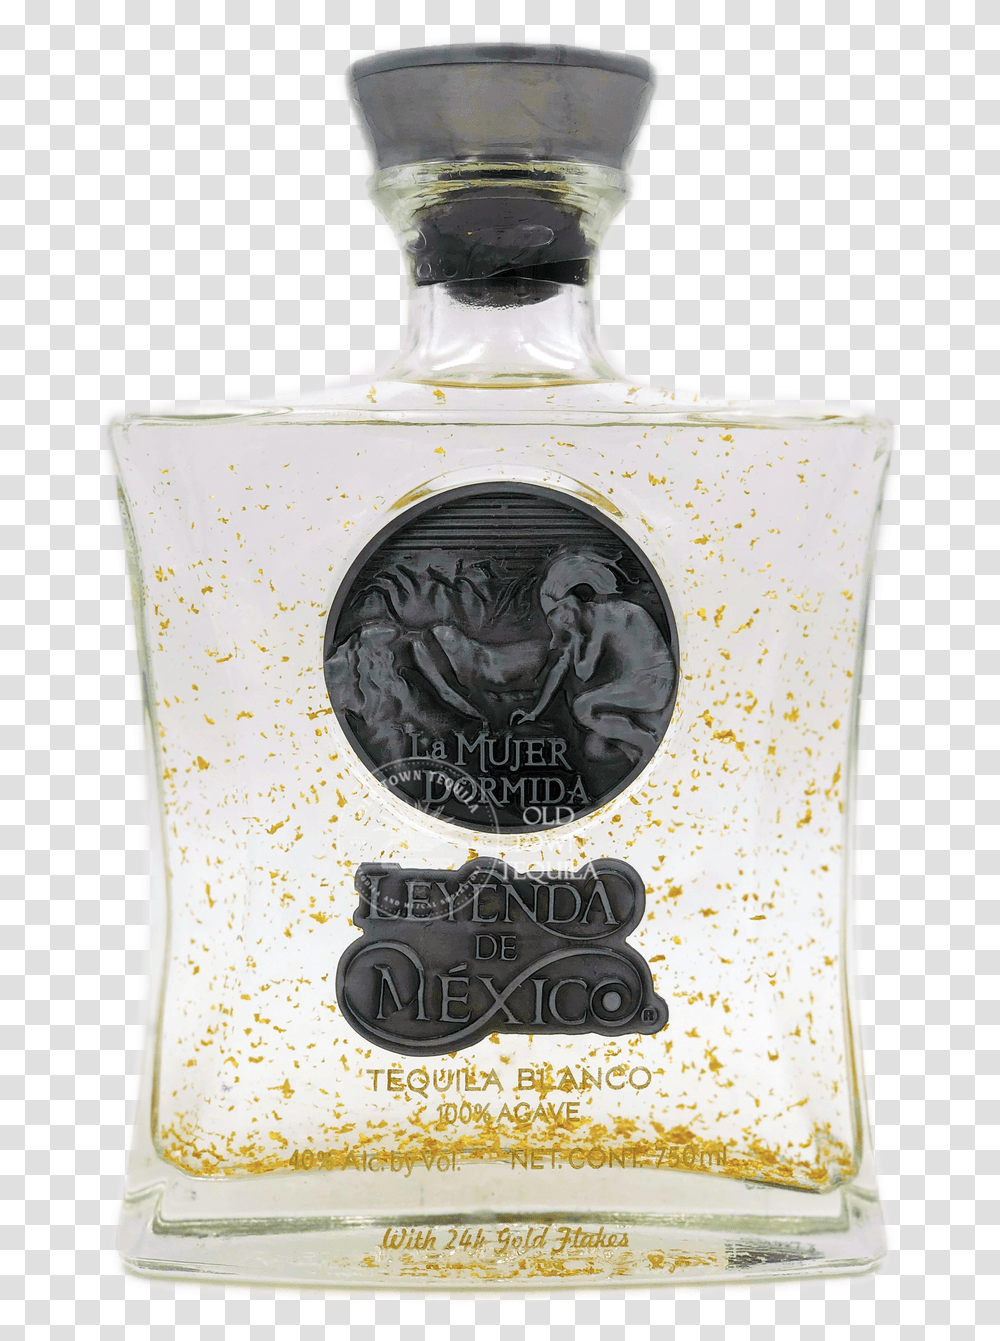 Leyenda De Mexico Blanco Tequila With Gold Flakes, Liquor, Alcohol, Beverage, Drink Transparent Png